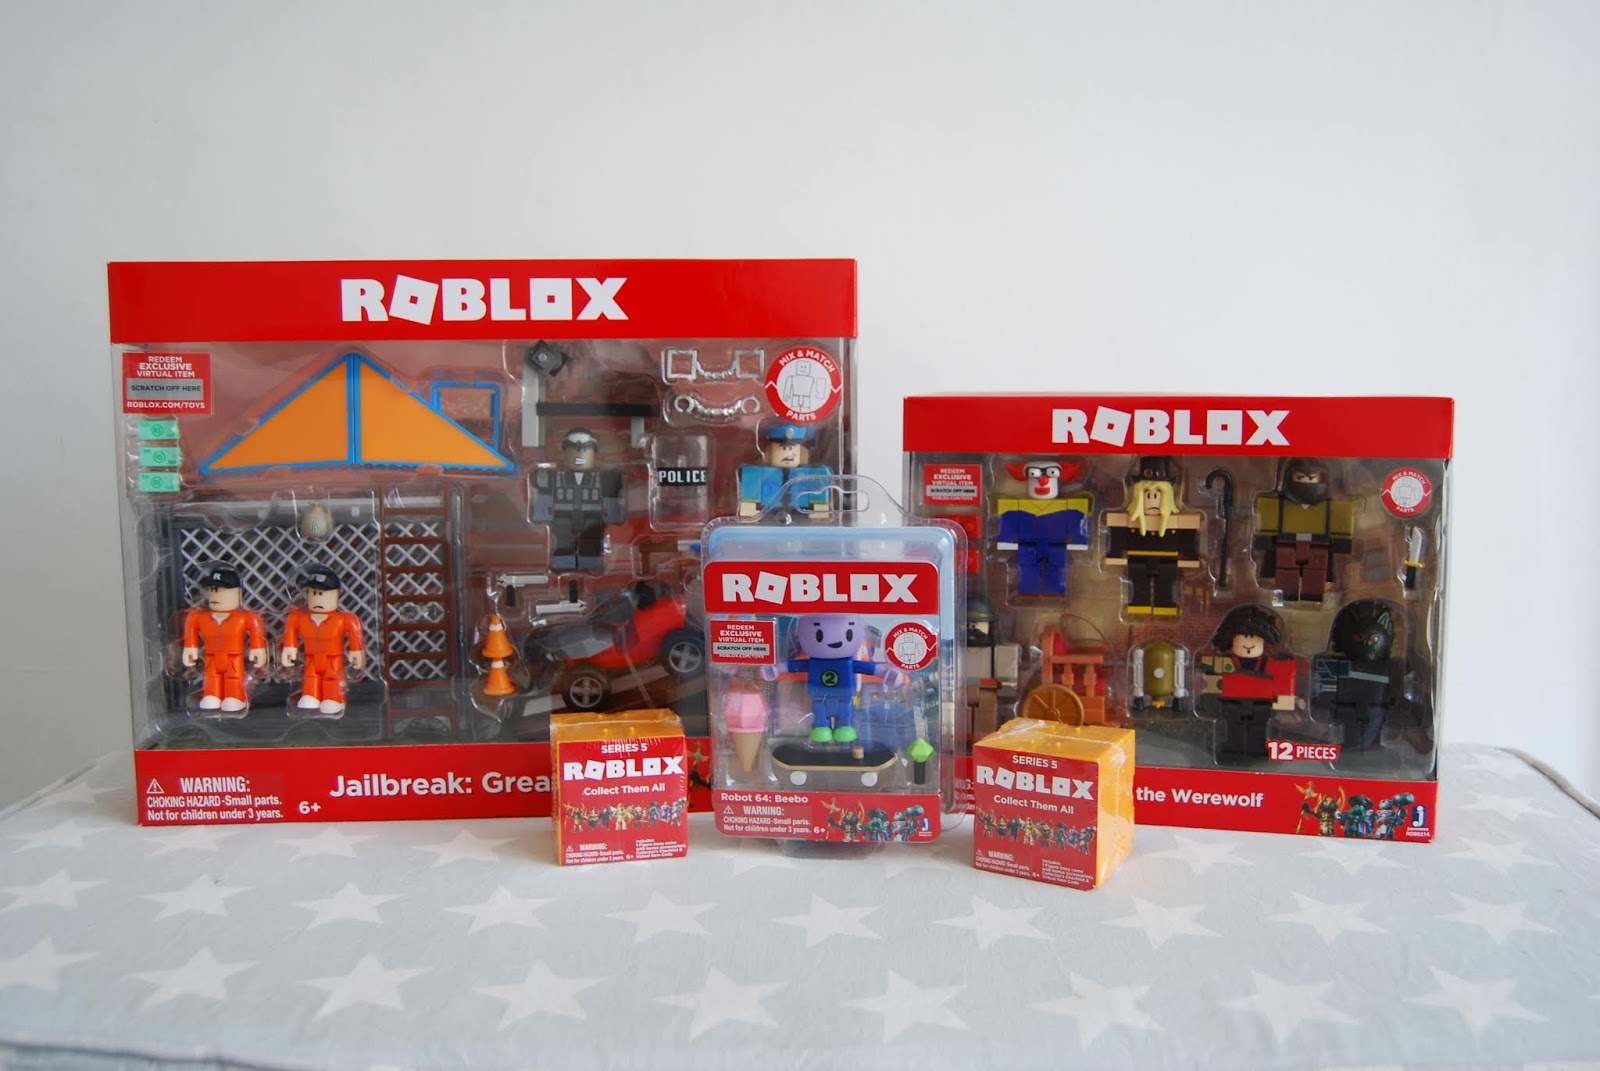 Chic Geek Diary Roblox Series 5 Toys Review Giveaway - roblox jailbreak great escape playset